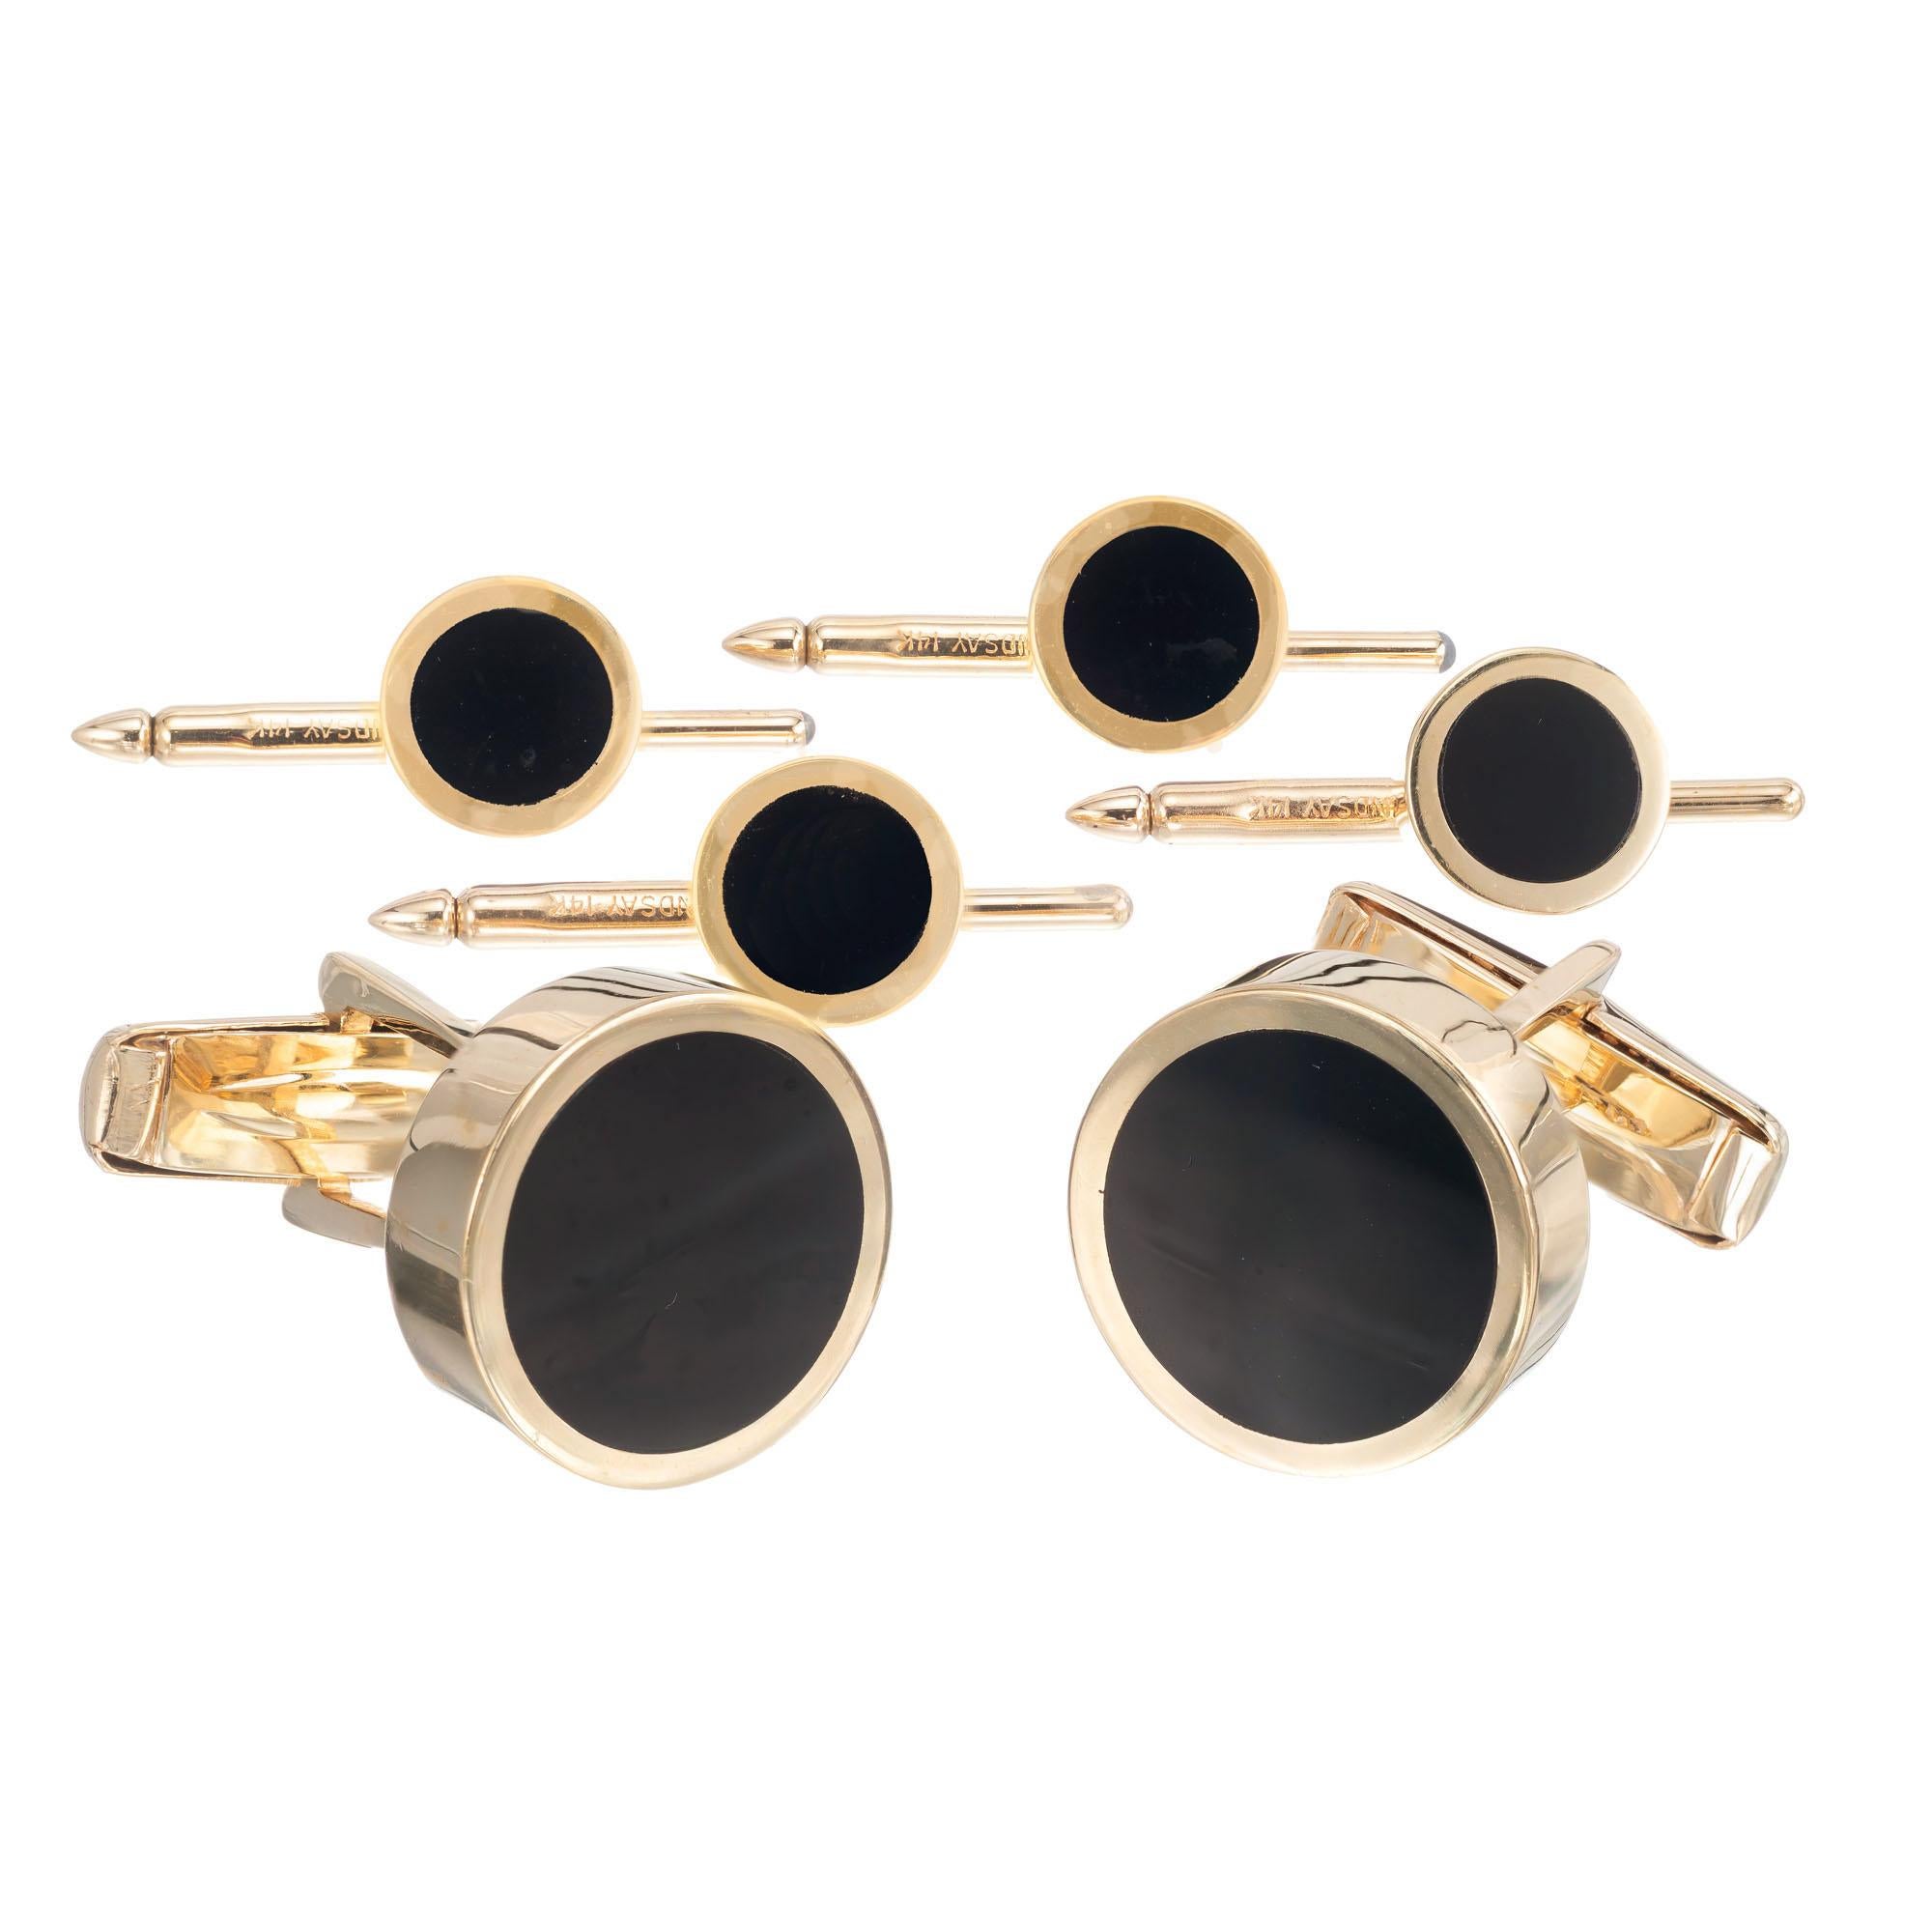 Classic black onyx and 14k yellow gold cufflink and complete shirt stud set 

2 round black onyx slices 13.45mm
4 round black onyx slices 7mm
14k yellow gold
Stamped: 14k
Hallmark: Lindsay
27.4 grams
Top to bottom: 15.95mm or 5/8 Inch
Width: 15.9mm